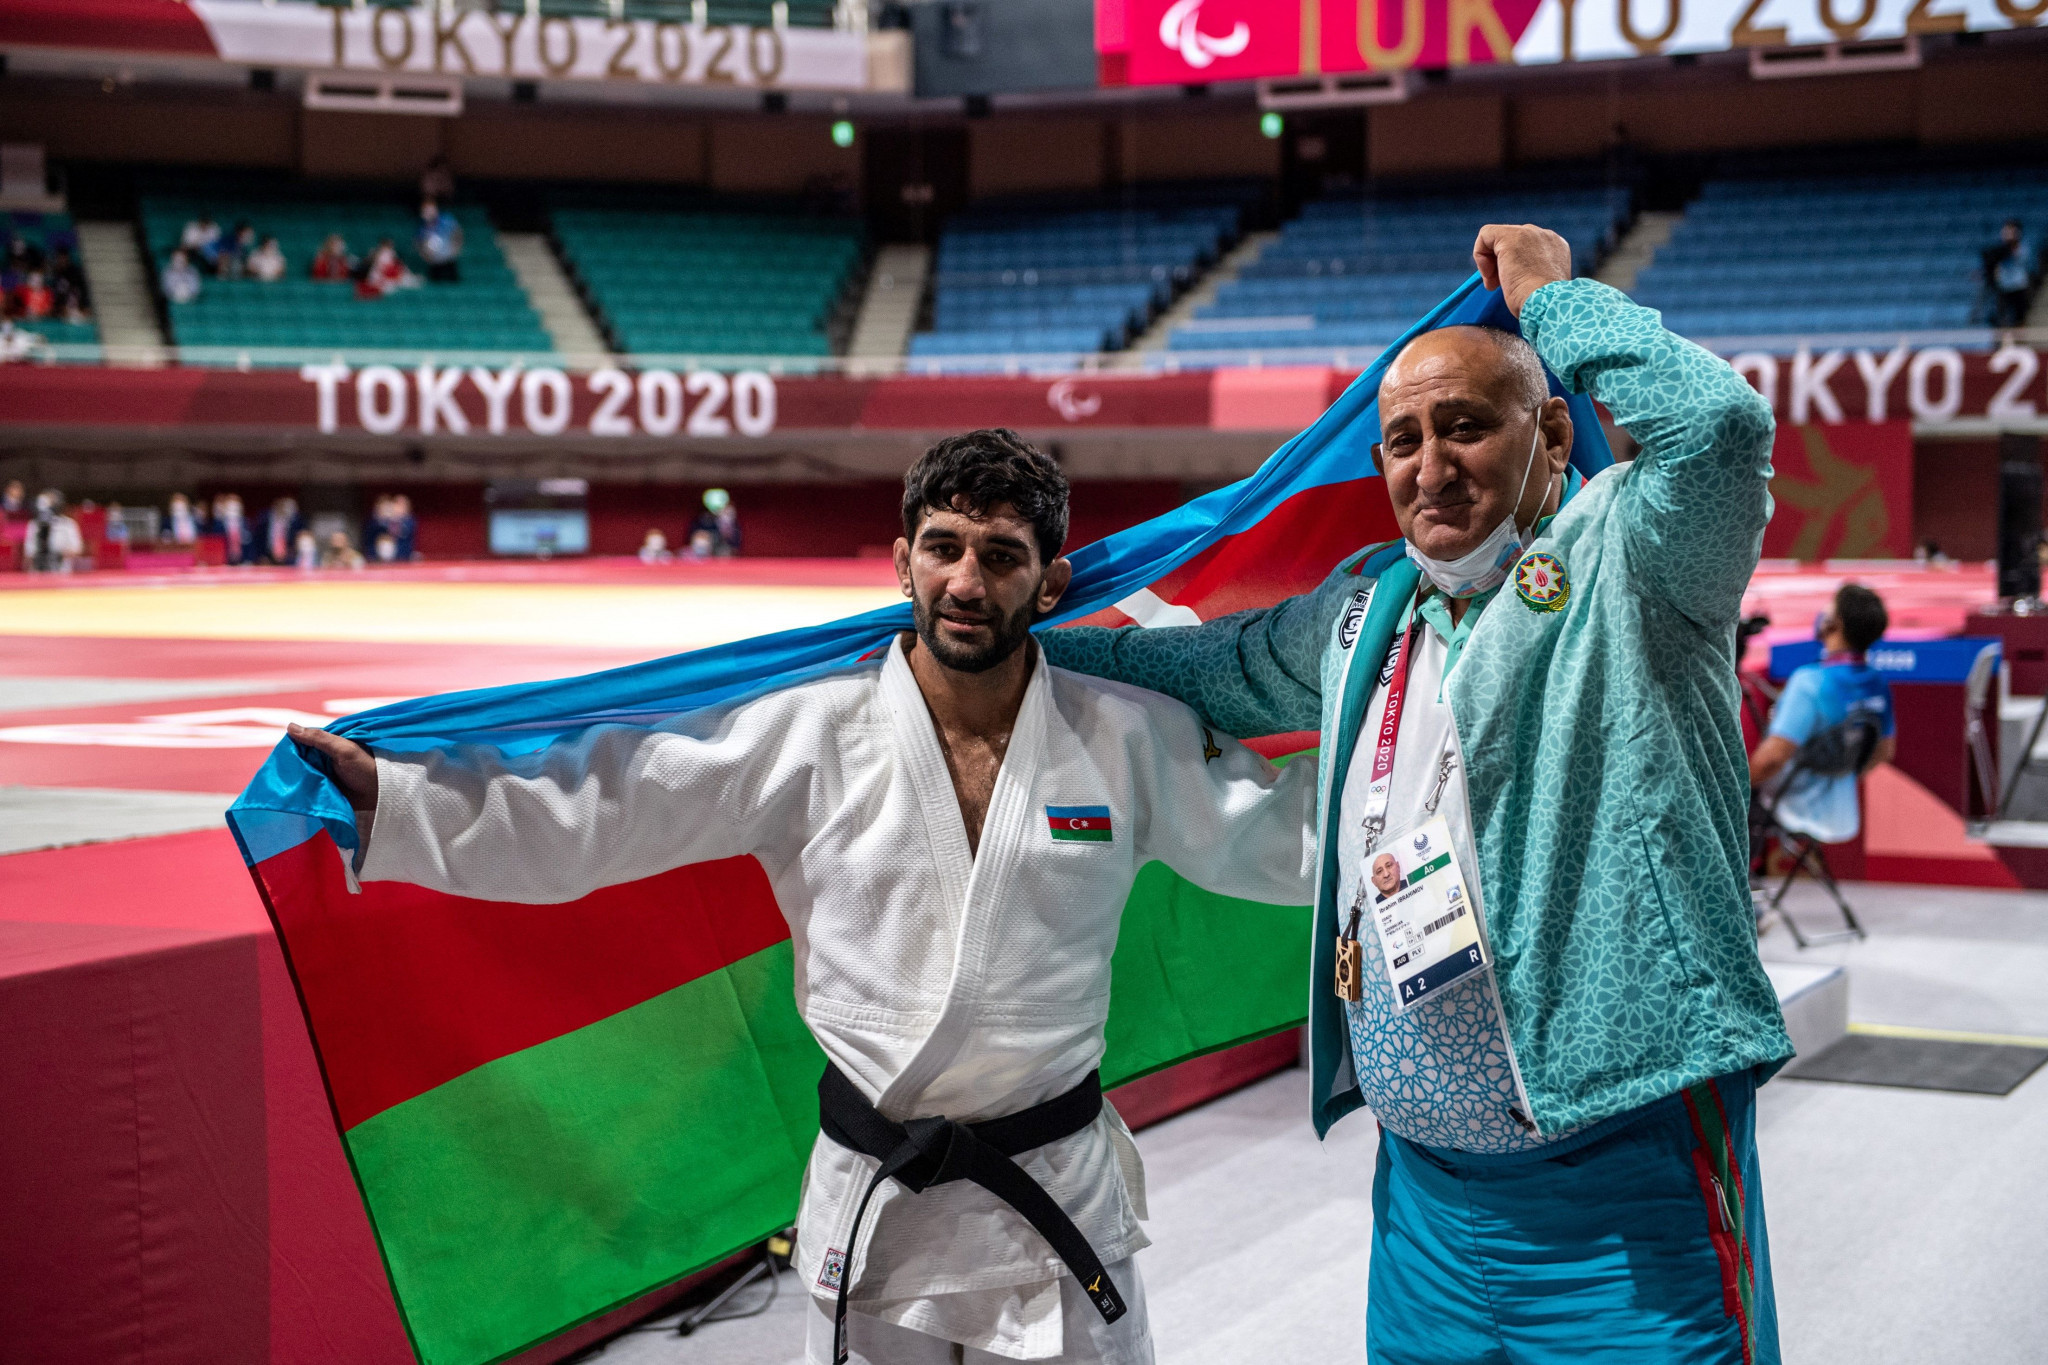 Azerbaijan dominated Para judo competition at the Tokyo 2020 Olympics, winning six of the 13 gold medals on offer ©Getty Images